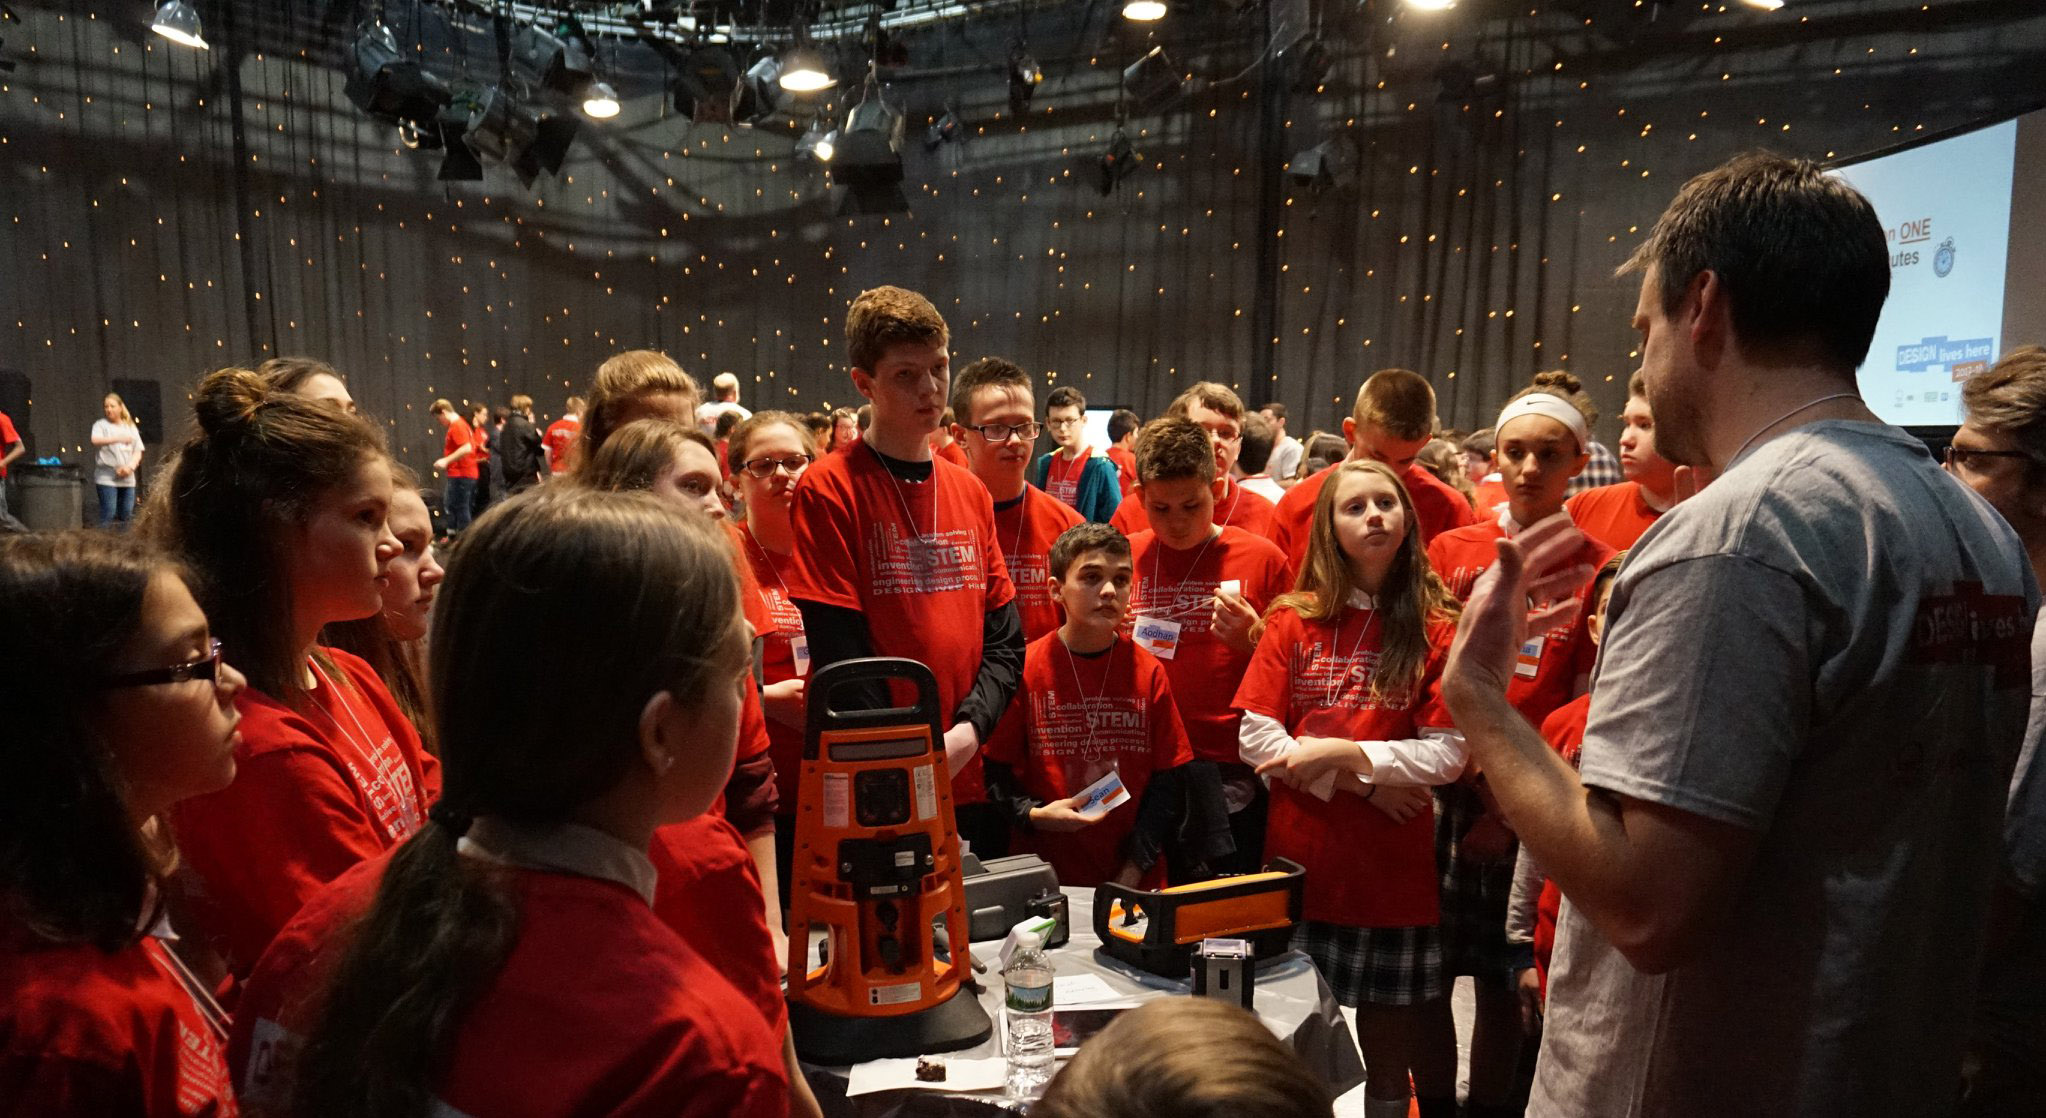 A Daedalus employee is standing at a table surrounded by about 20 kids attending Design Live Here. The Daedalus employee is demonstrating products developed by Daedalus, including an area gas monitor and a mining remote control.